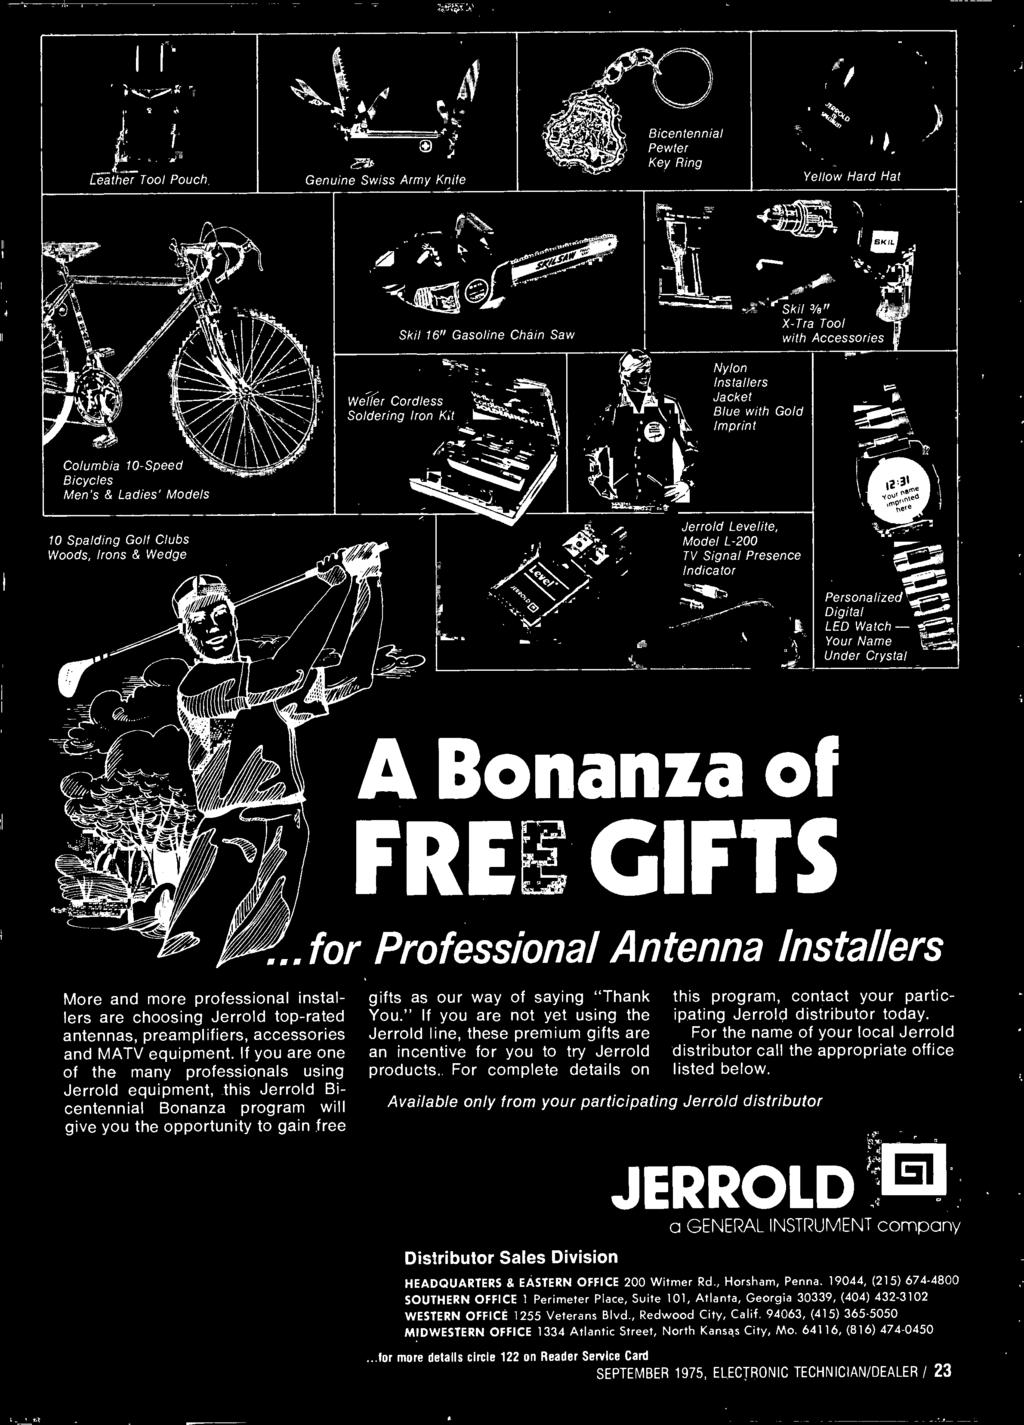 ..for Professional Antenna nstallers gifts as our way of saying "Thank You." f you are not yet using the Jerrold line, these premium gifts are an incentive for you to try Jerrold products.